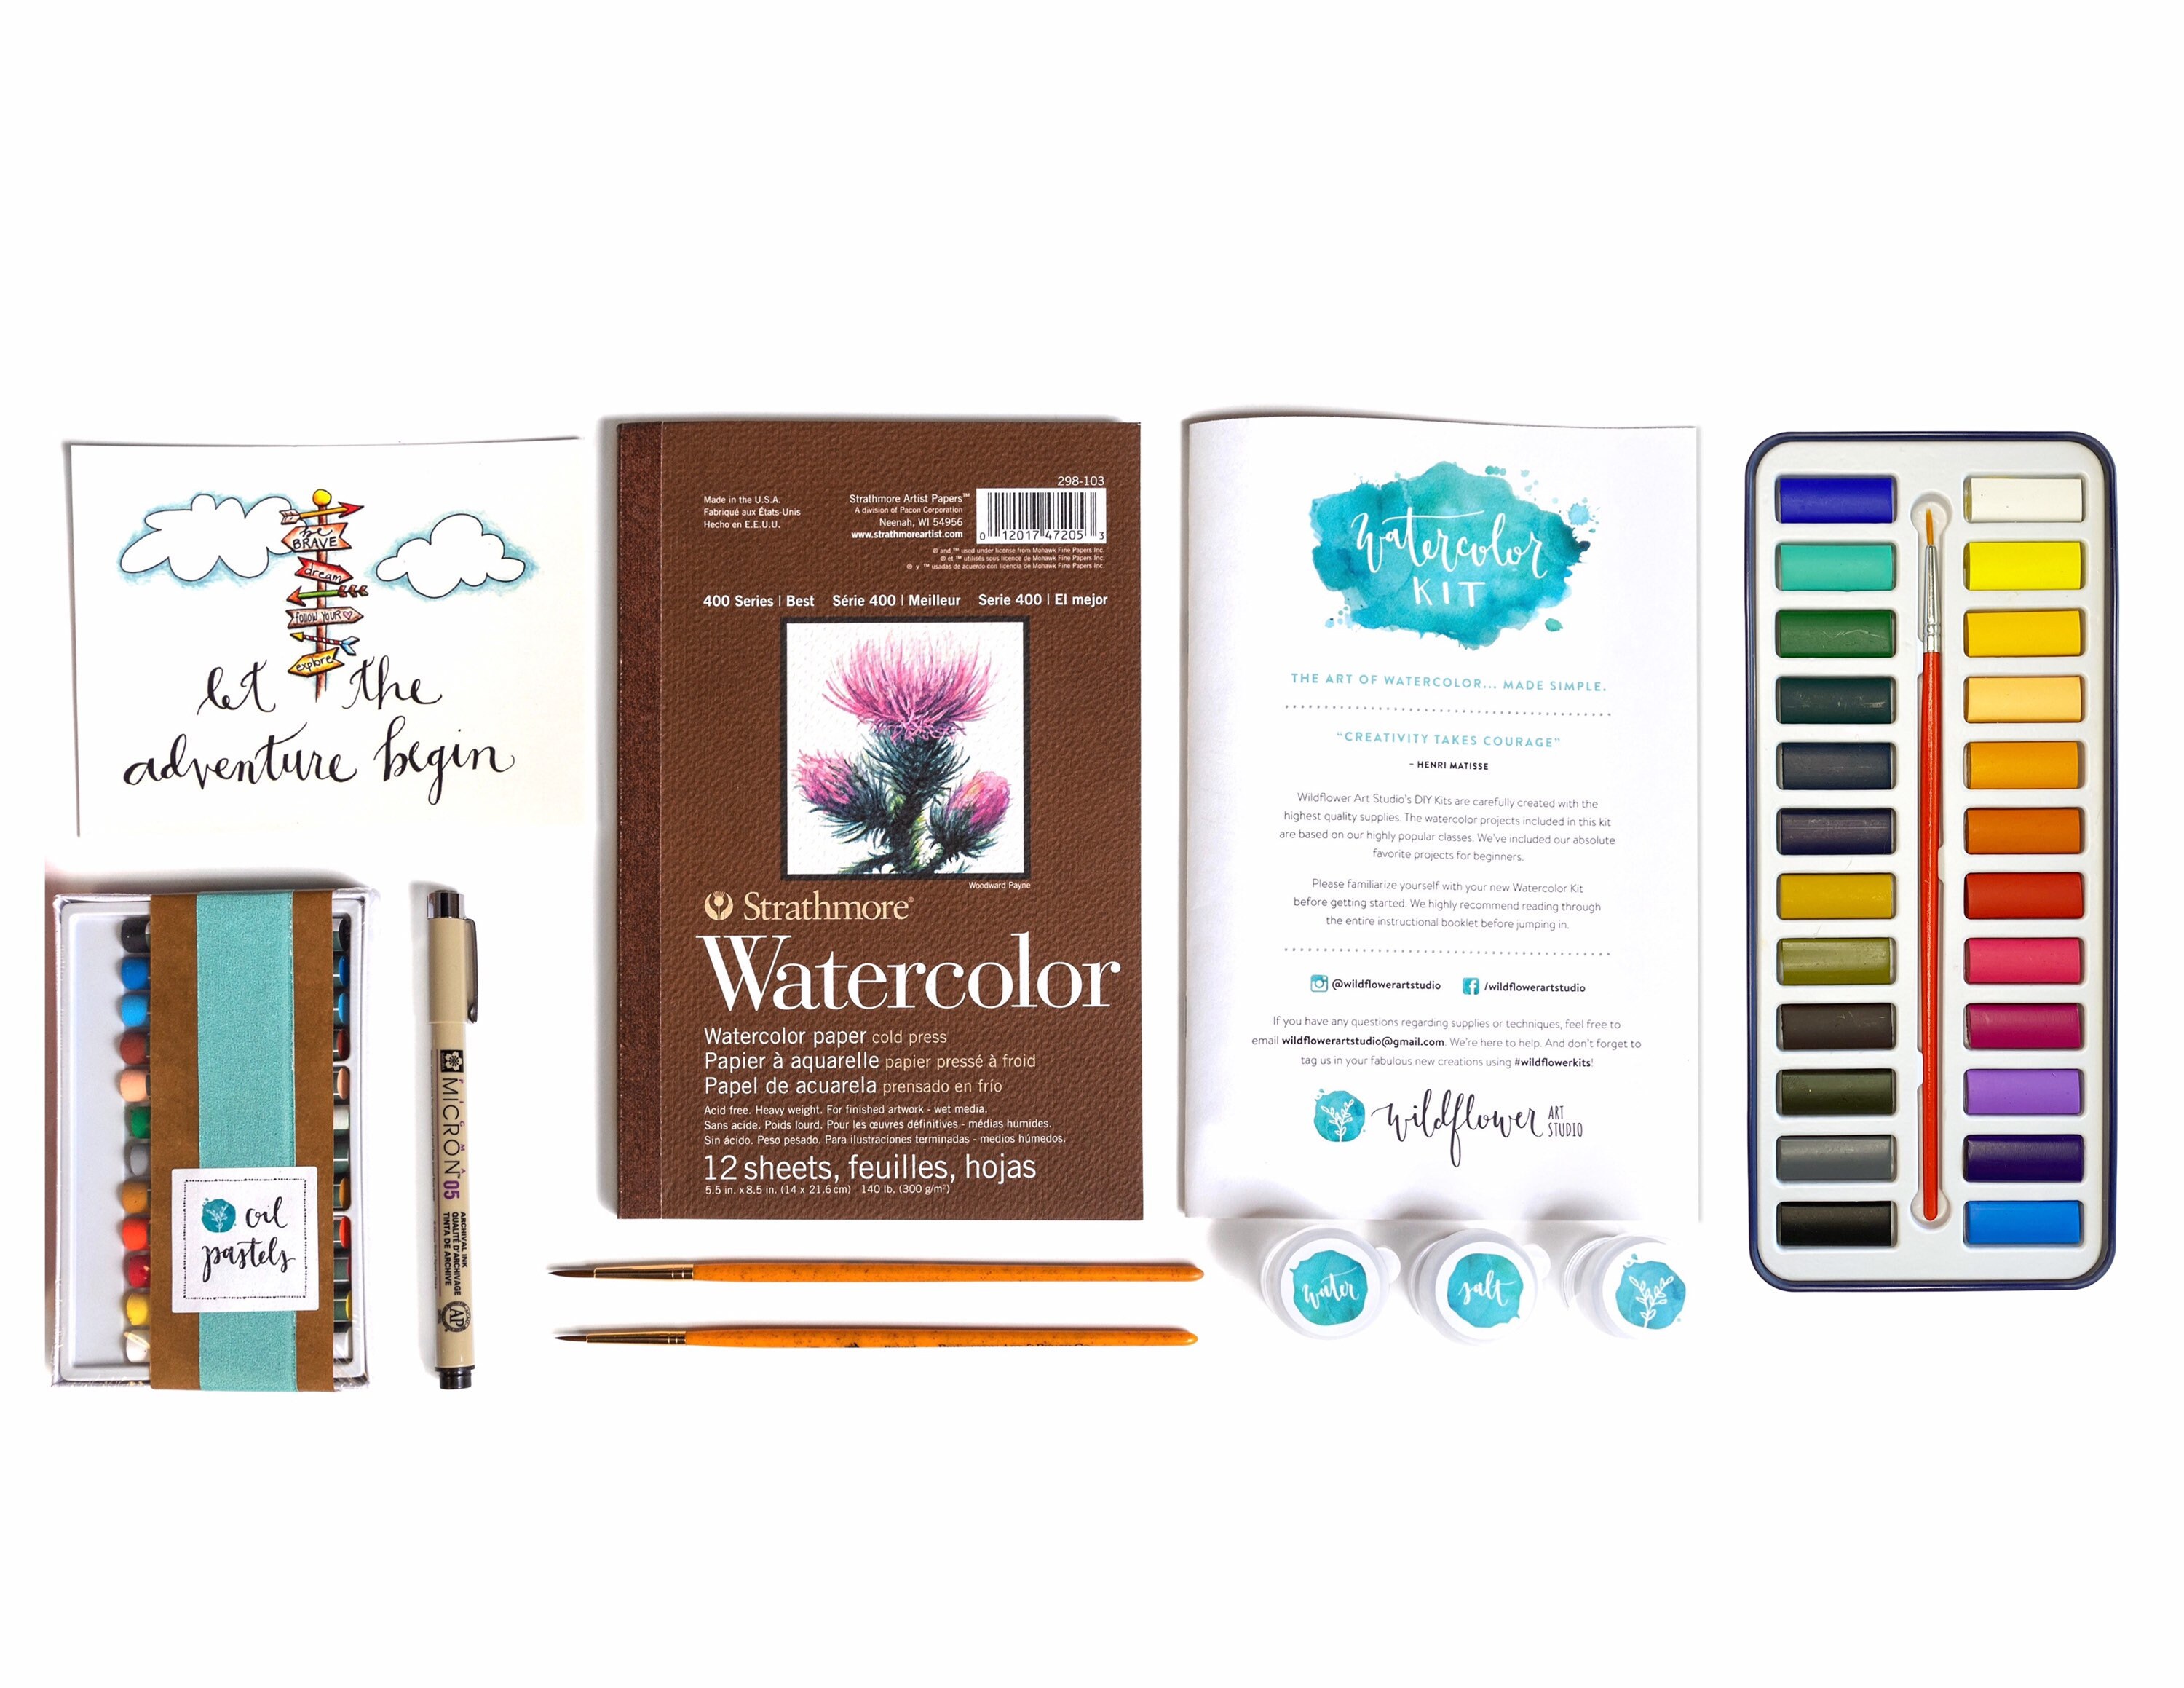  Watercolor Kit for Adults, Floral Watercolors, DIY Paint Set,  Beginner Watercolor : Handmade Products